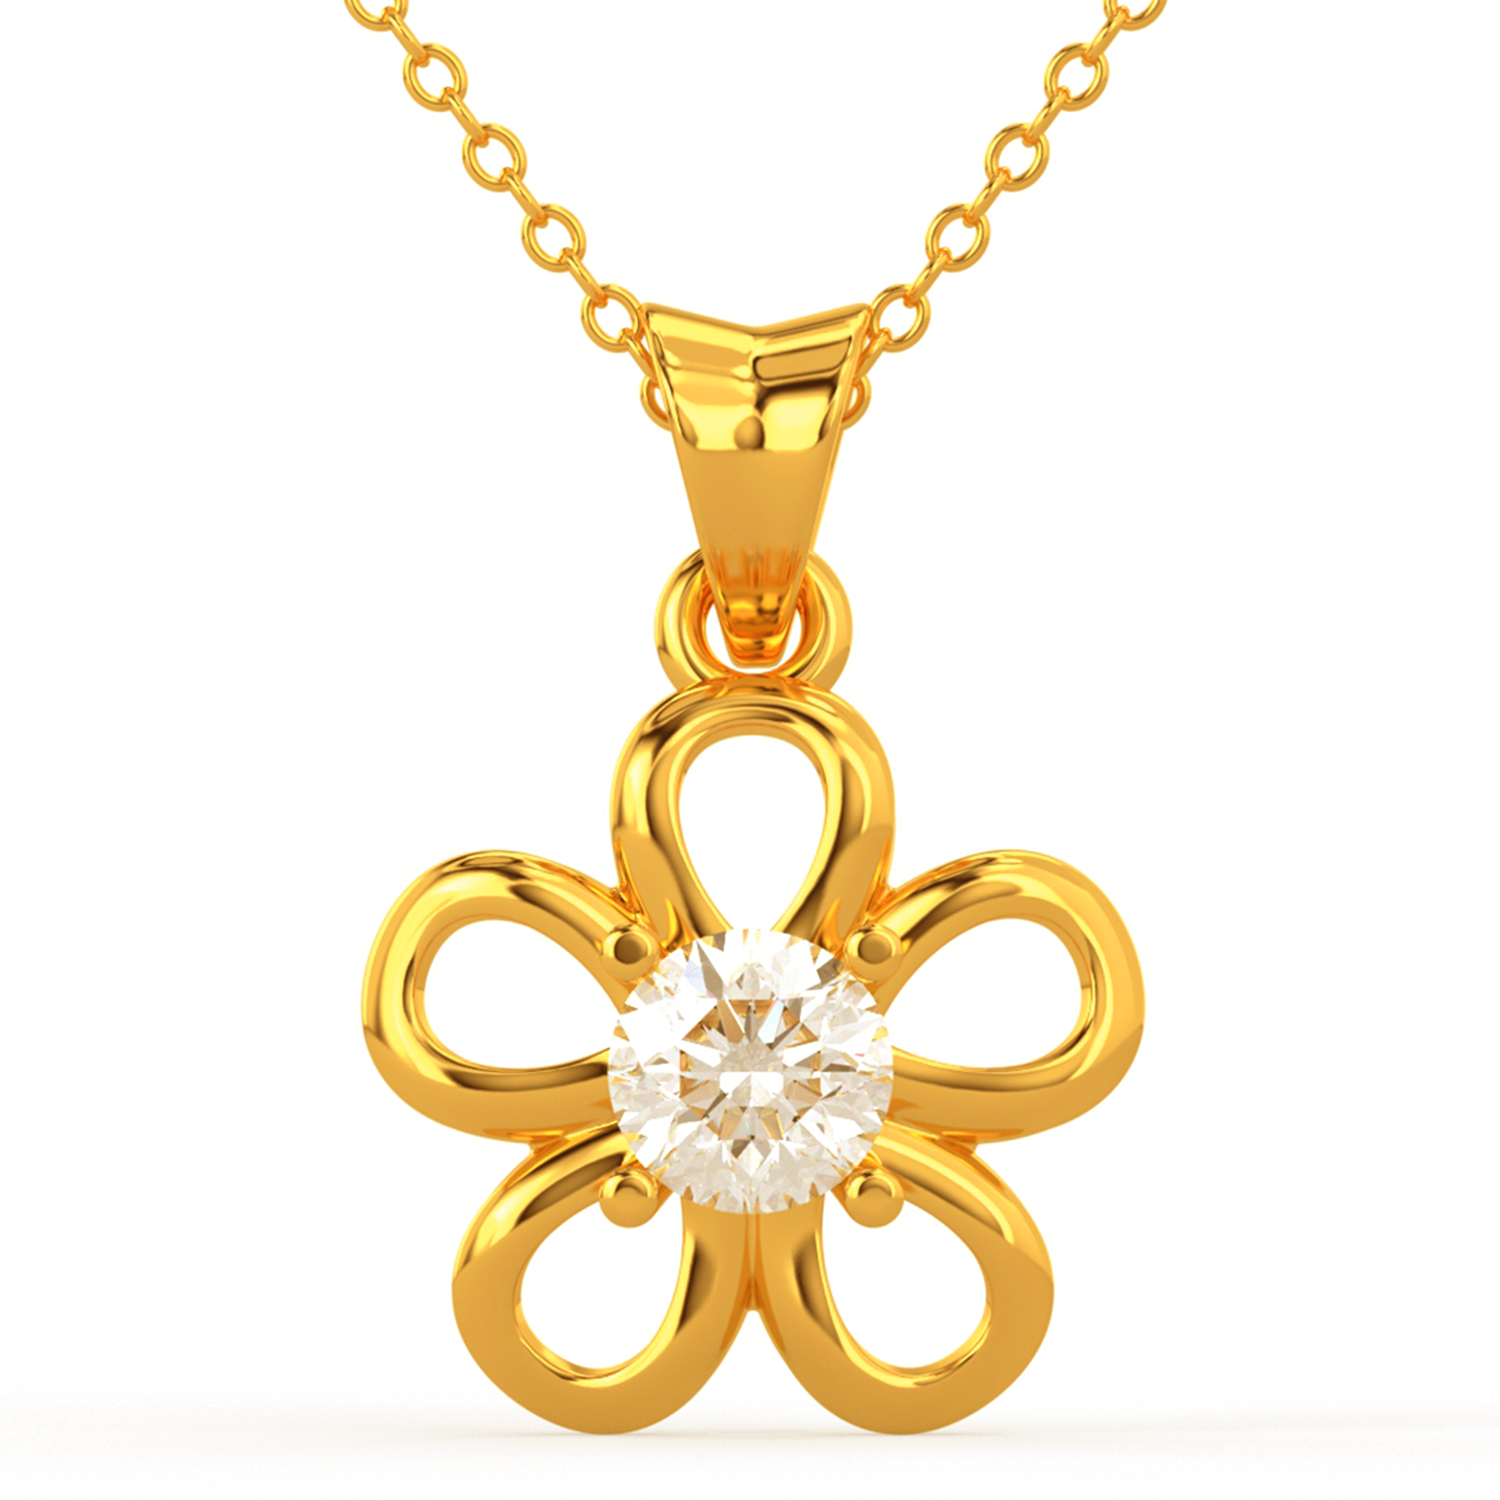 Enhance the Look With A Gold Pendant